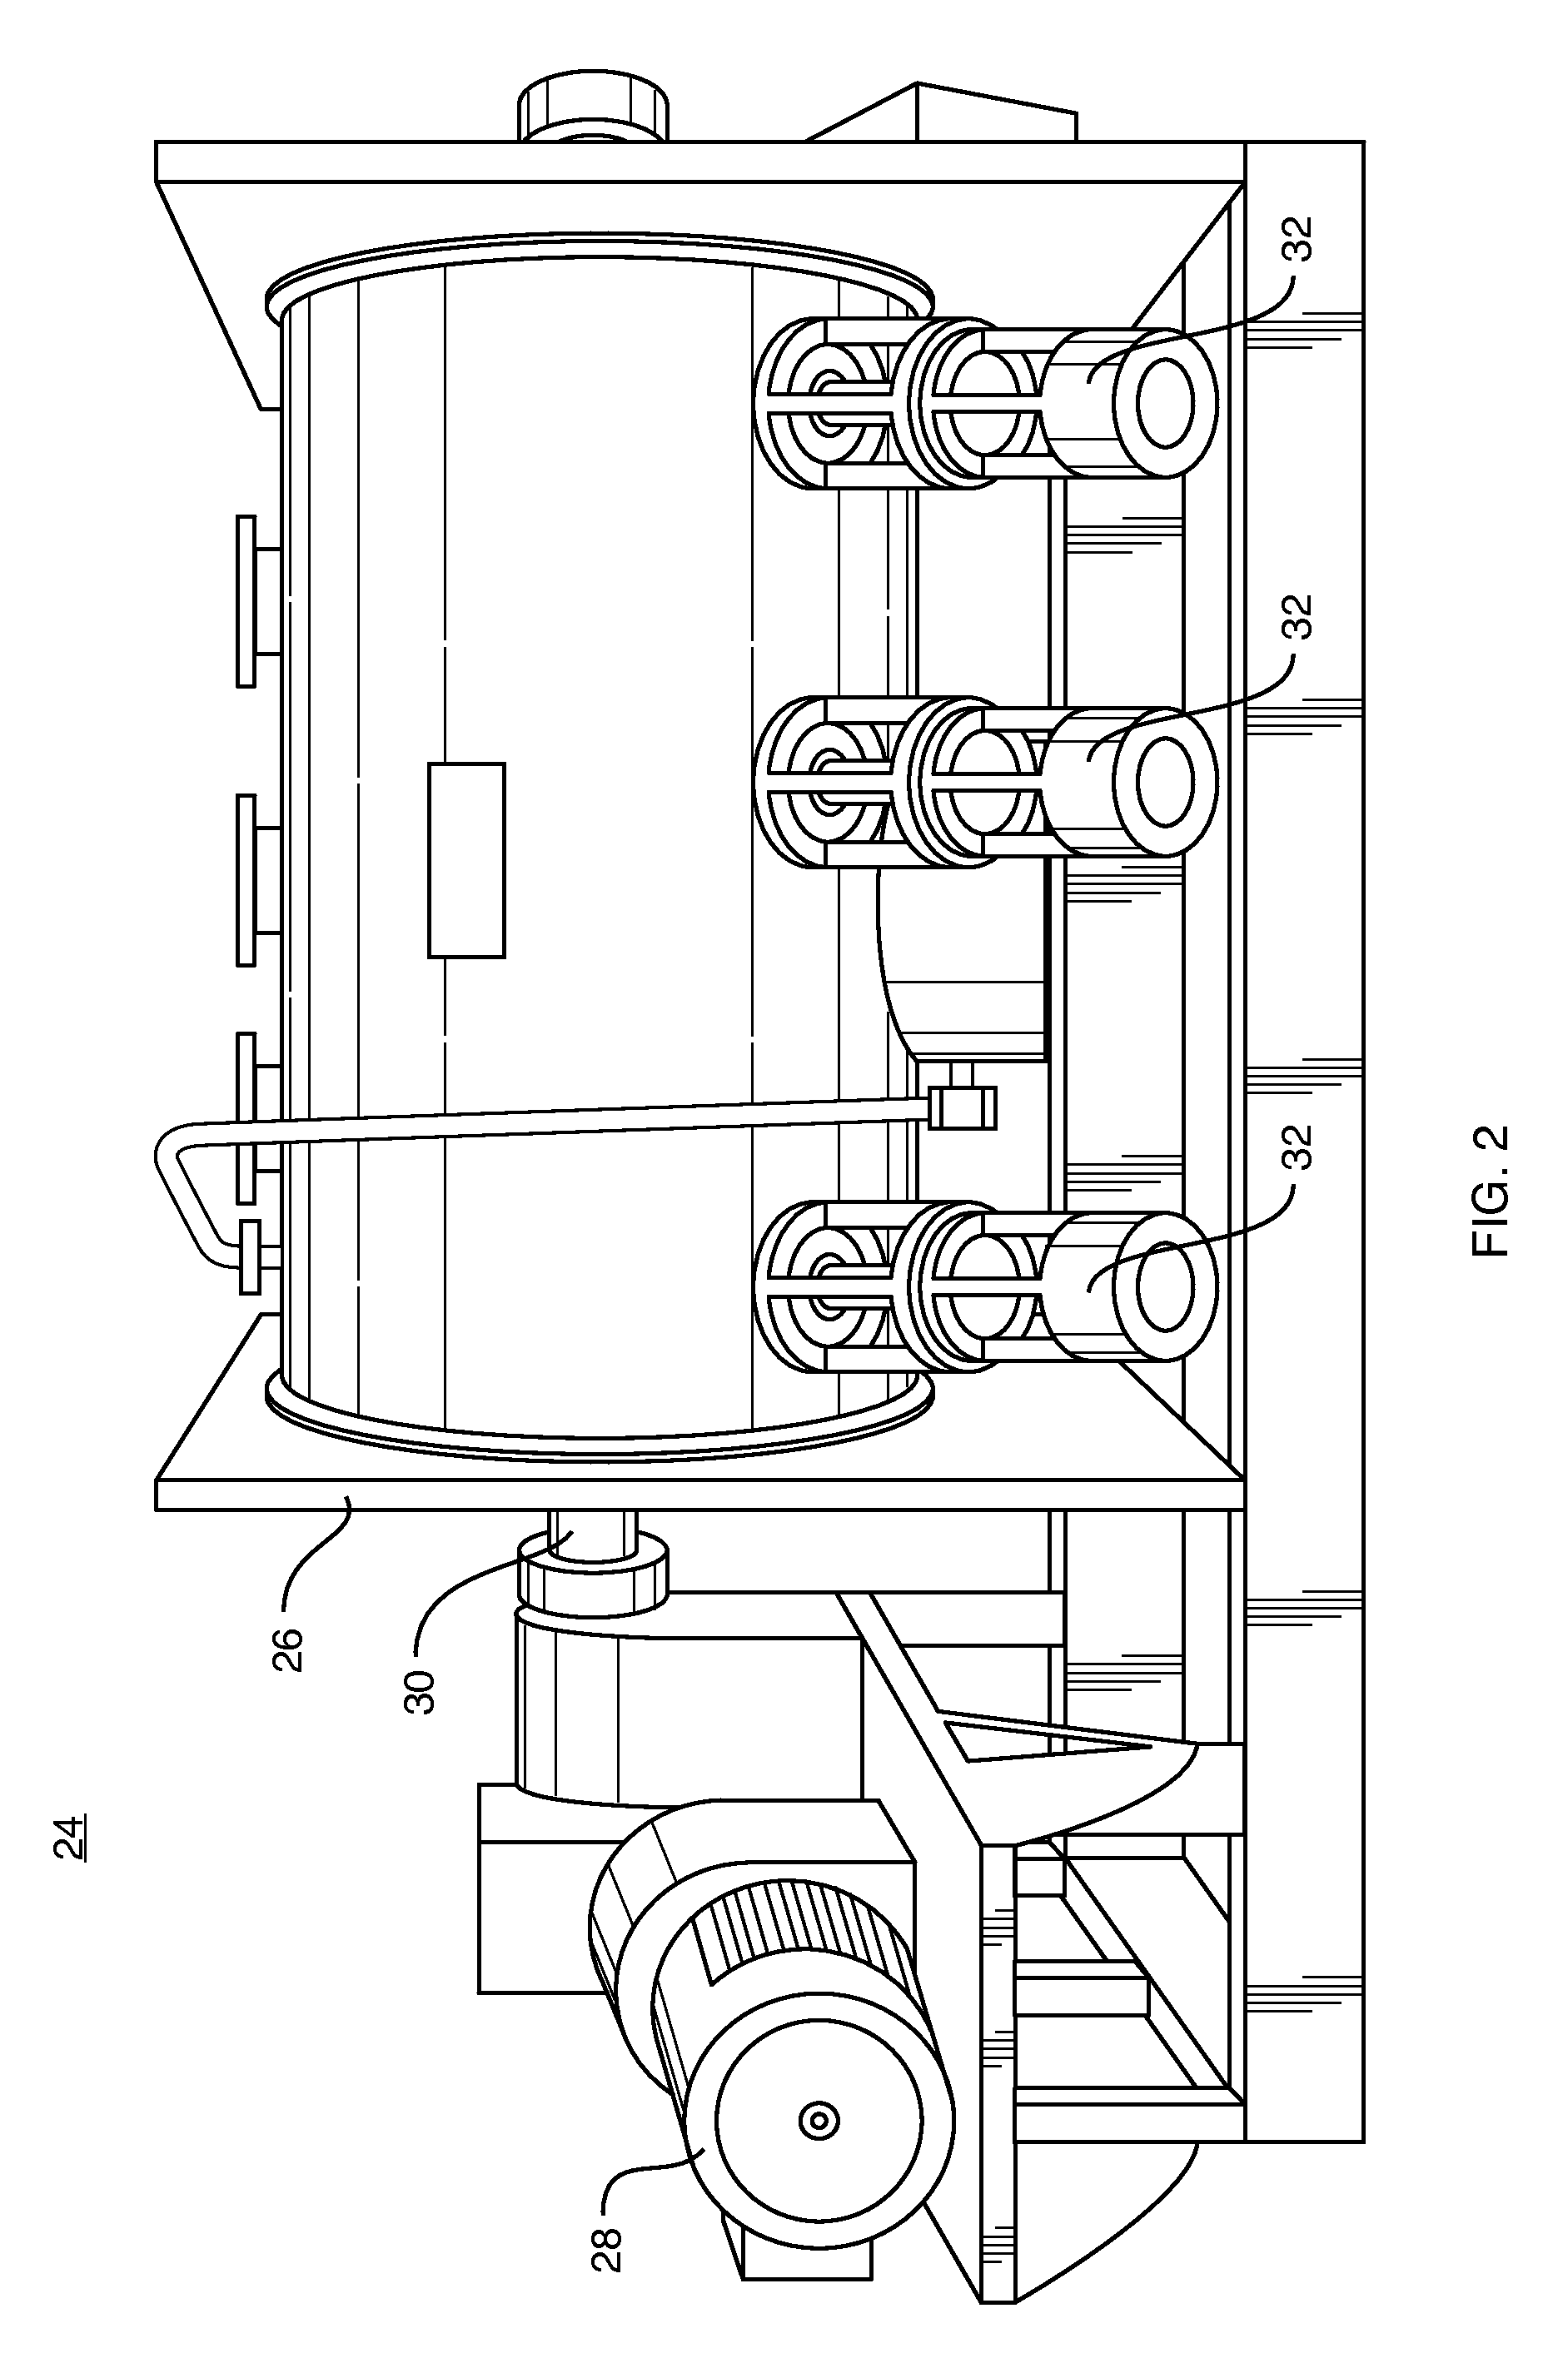 Asphalt material recycling system and method